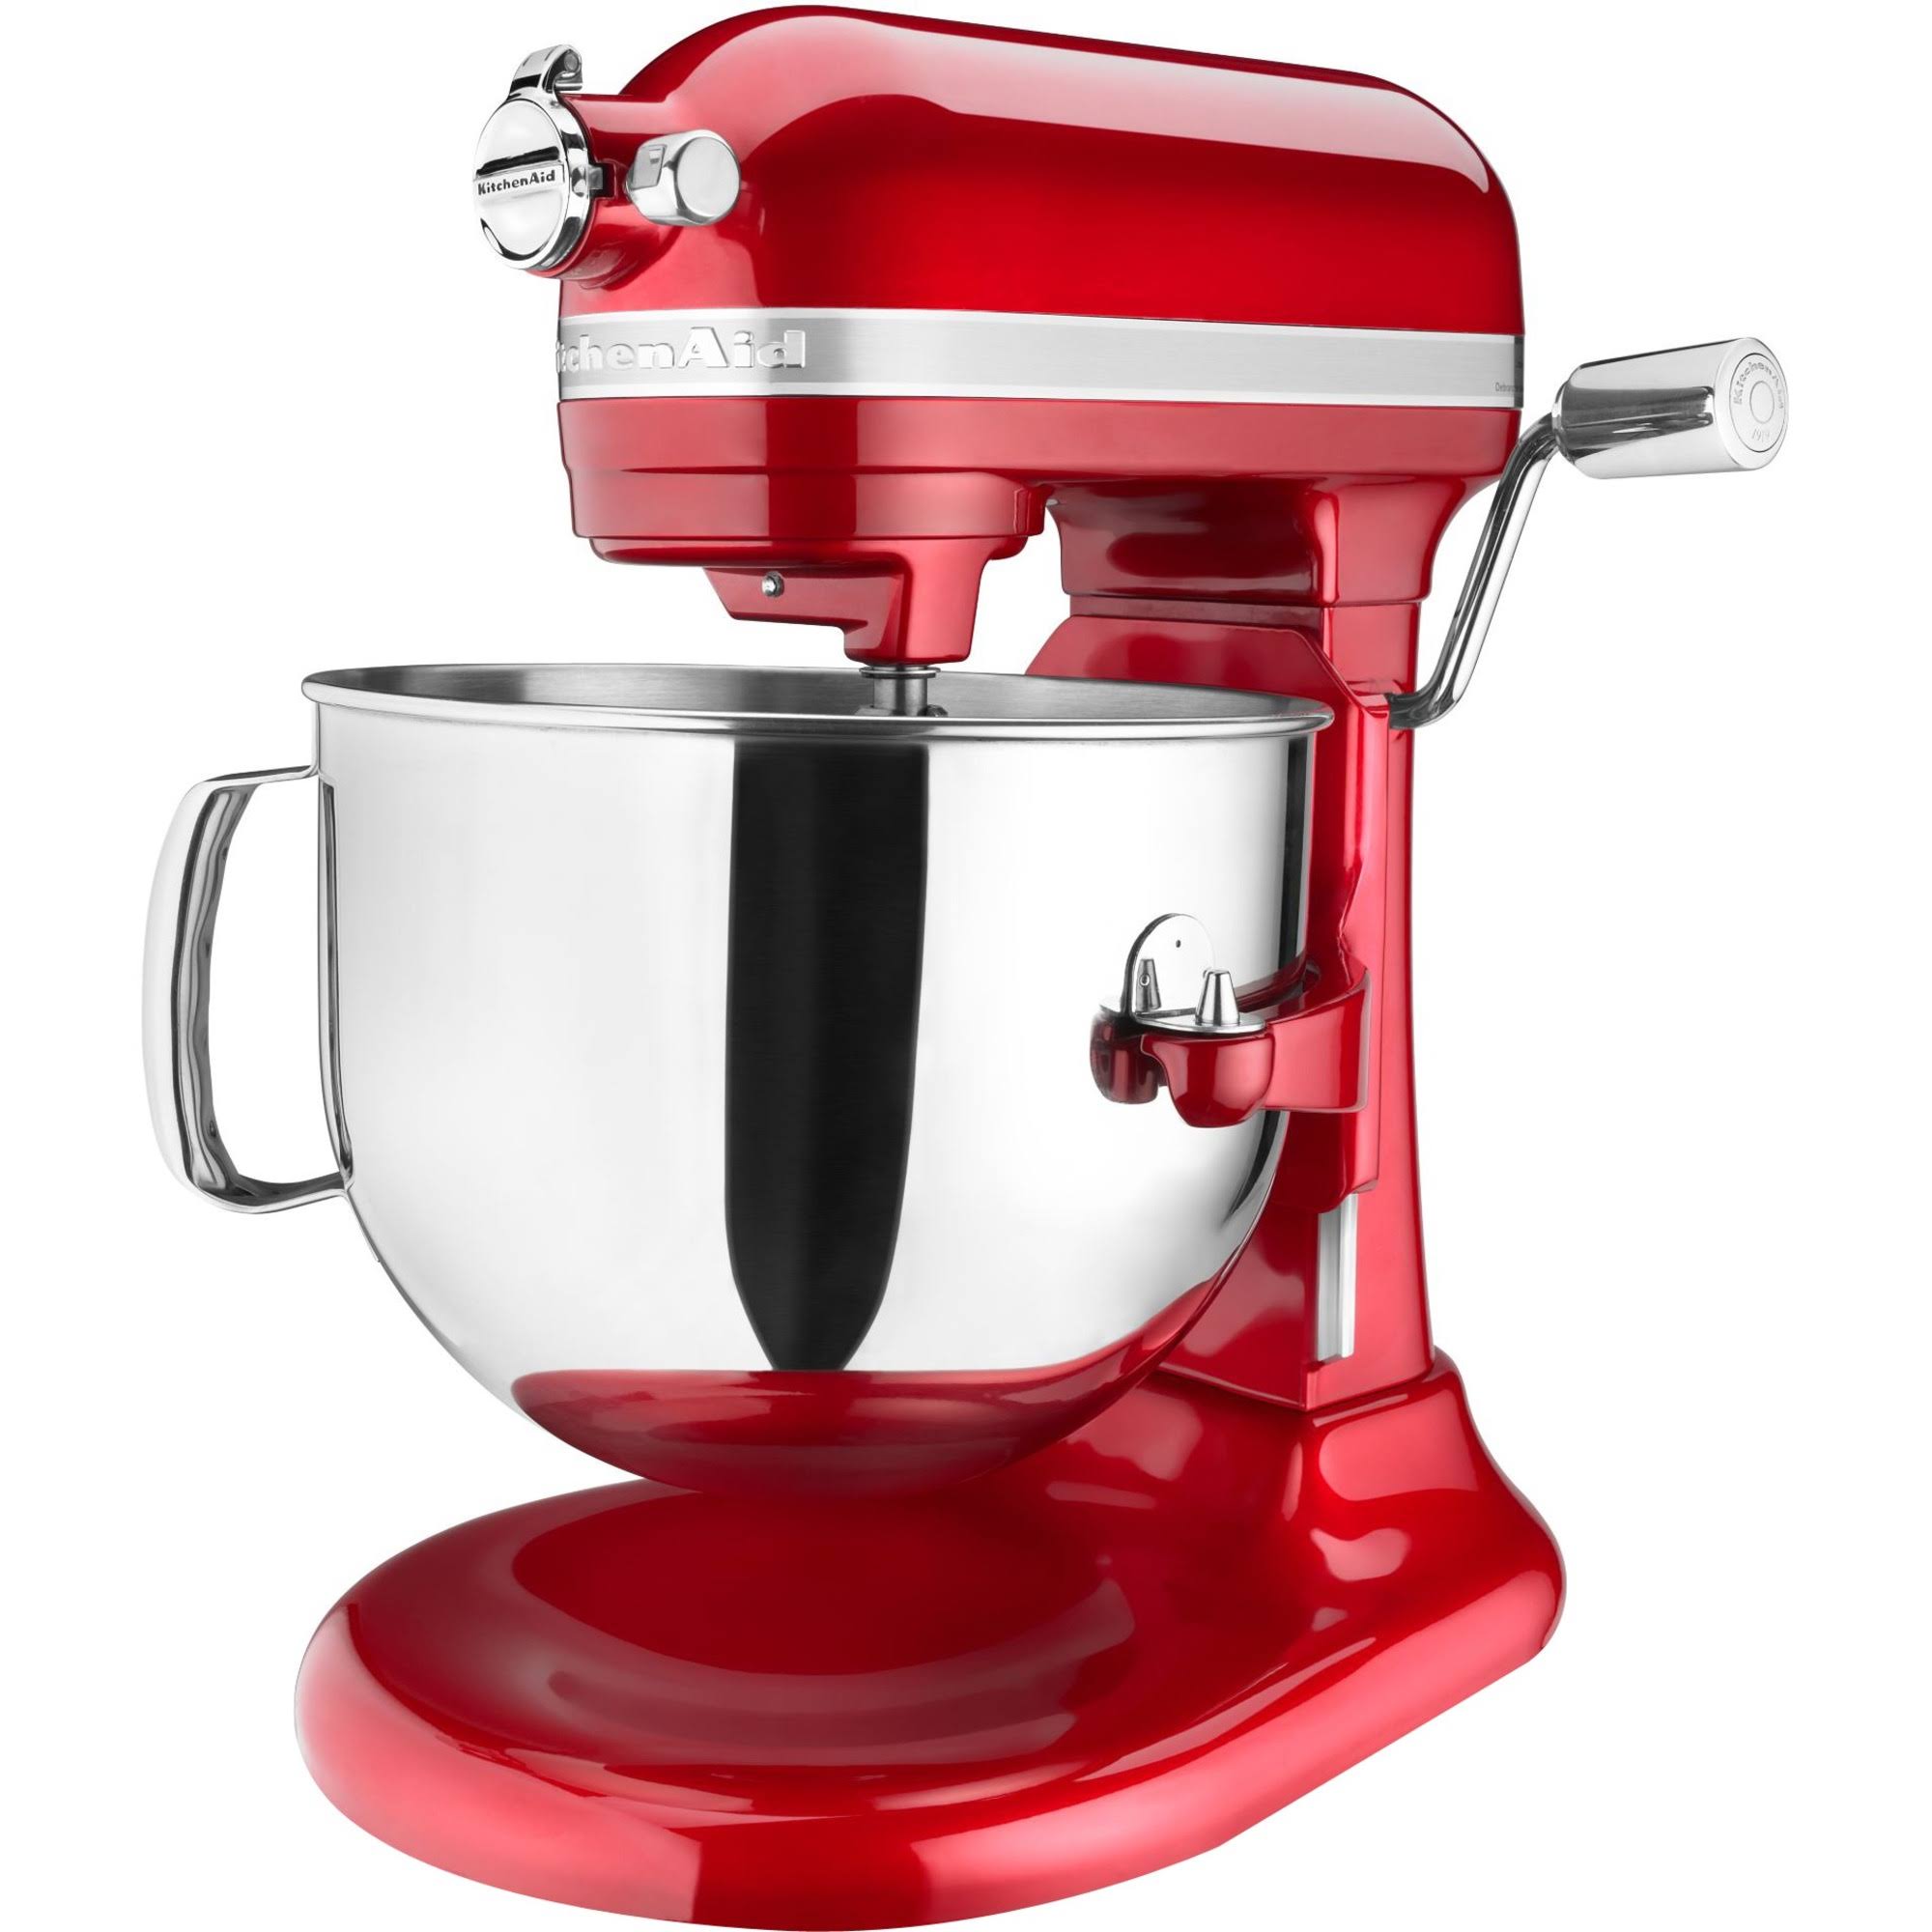 Kitchenaid Pro Line Stand Mixer - Candy Apple Red